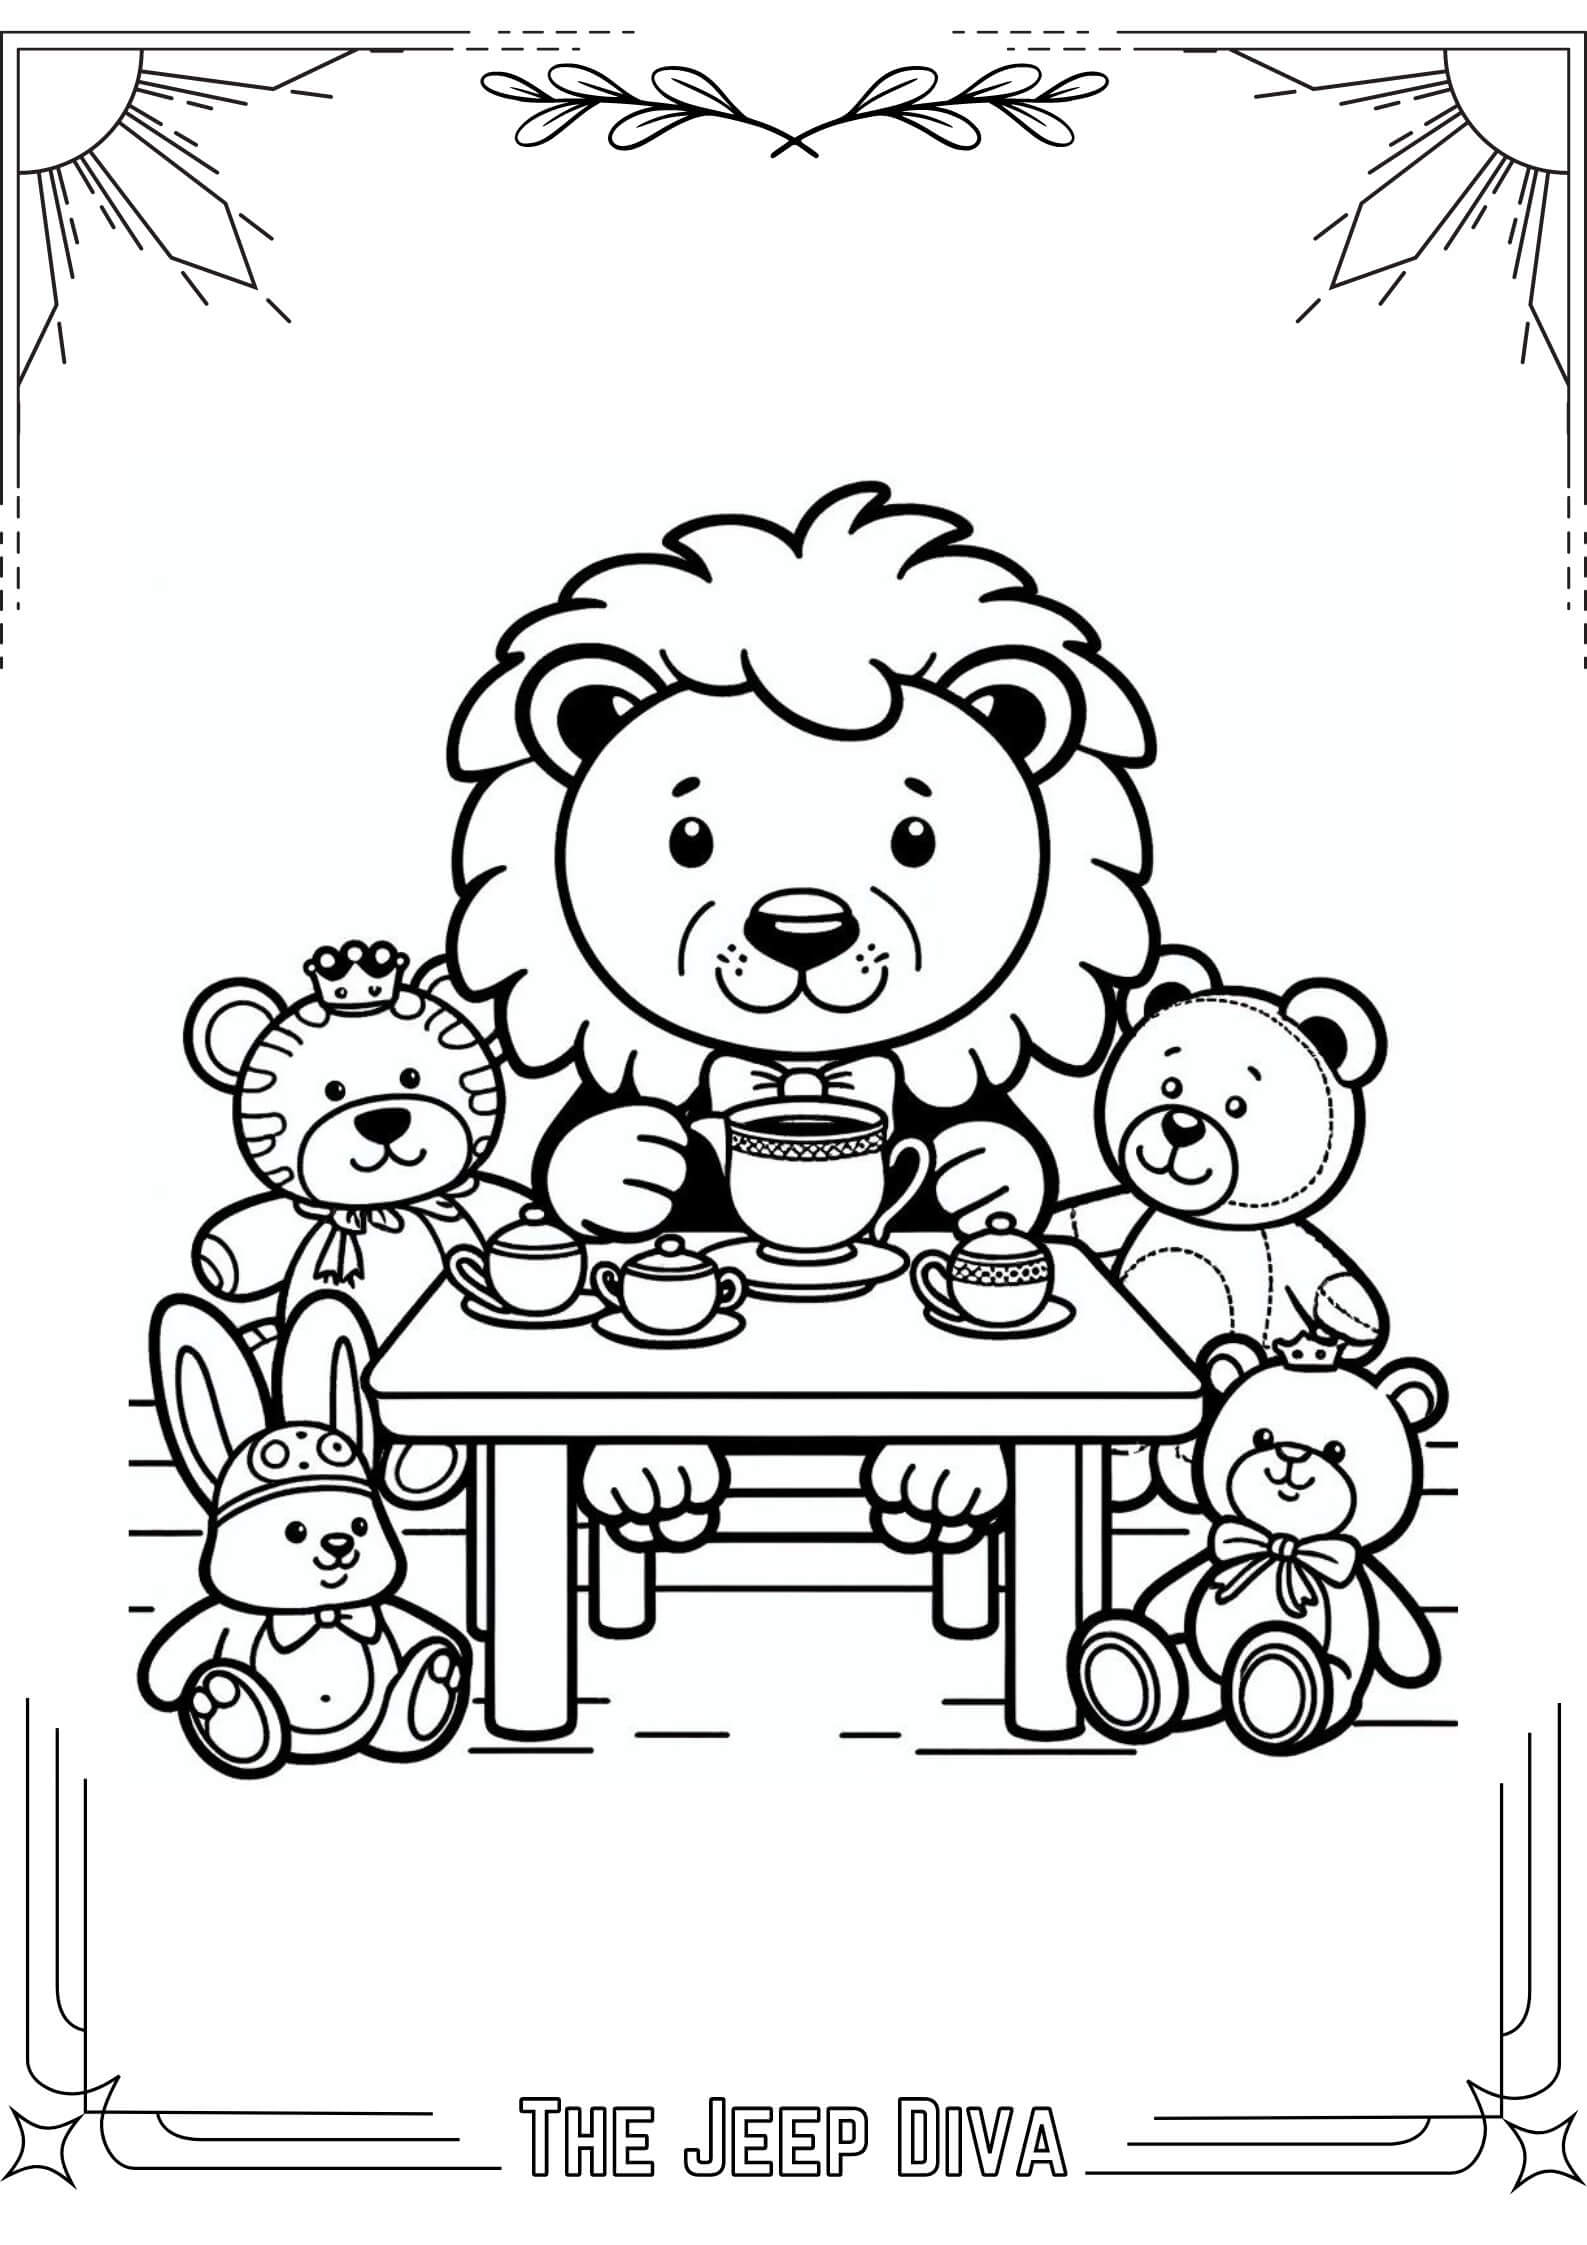 The Jeep Diva Coloring Page Lion Medium Difficulty 22